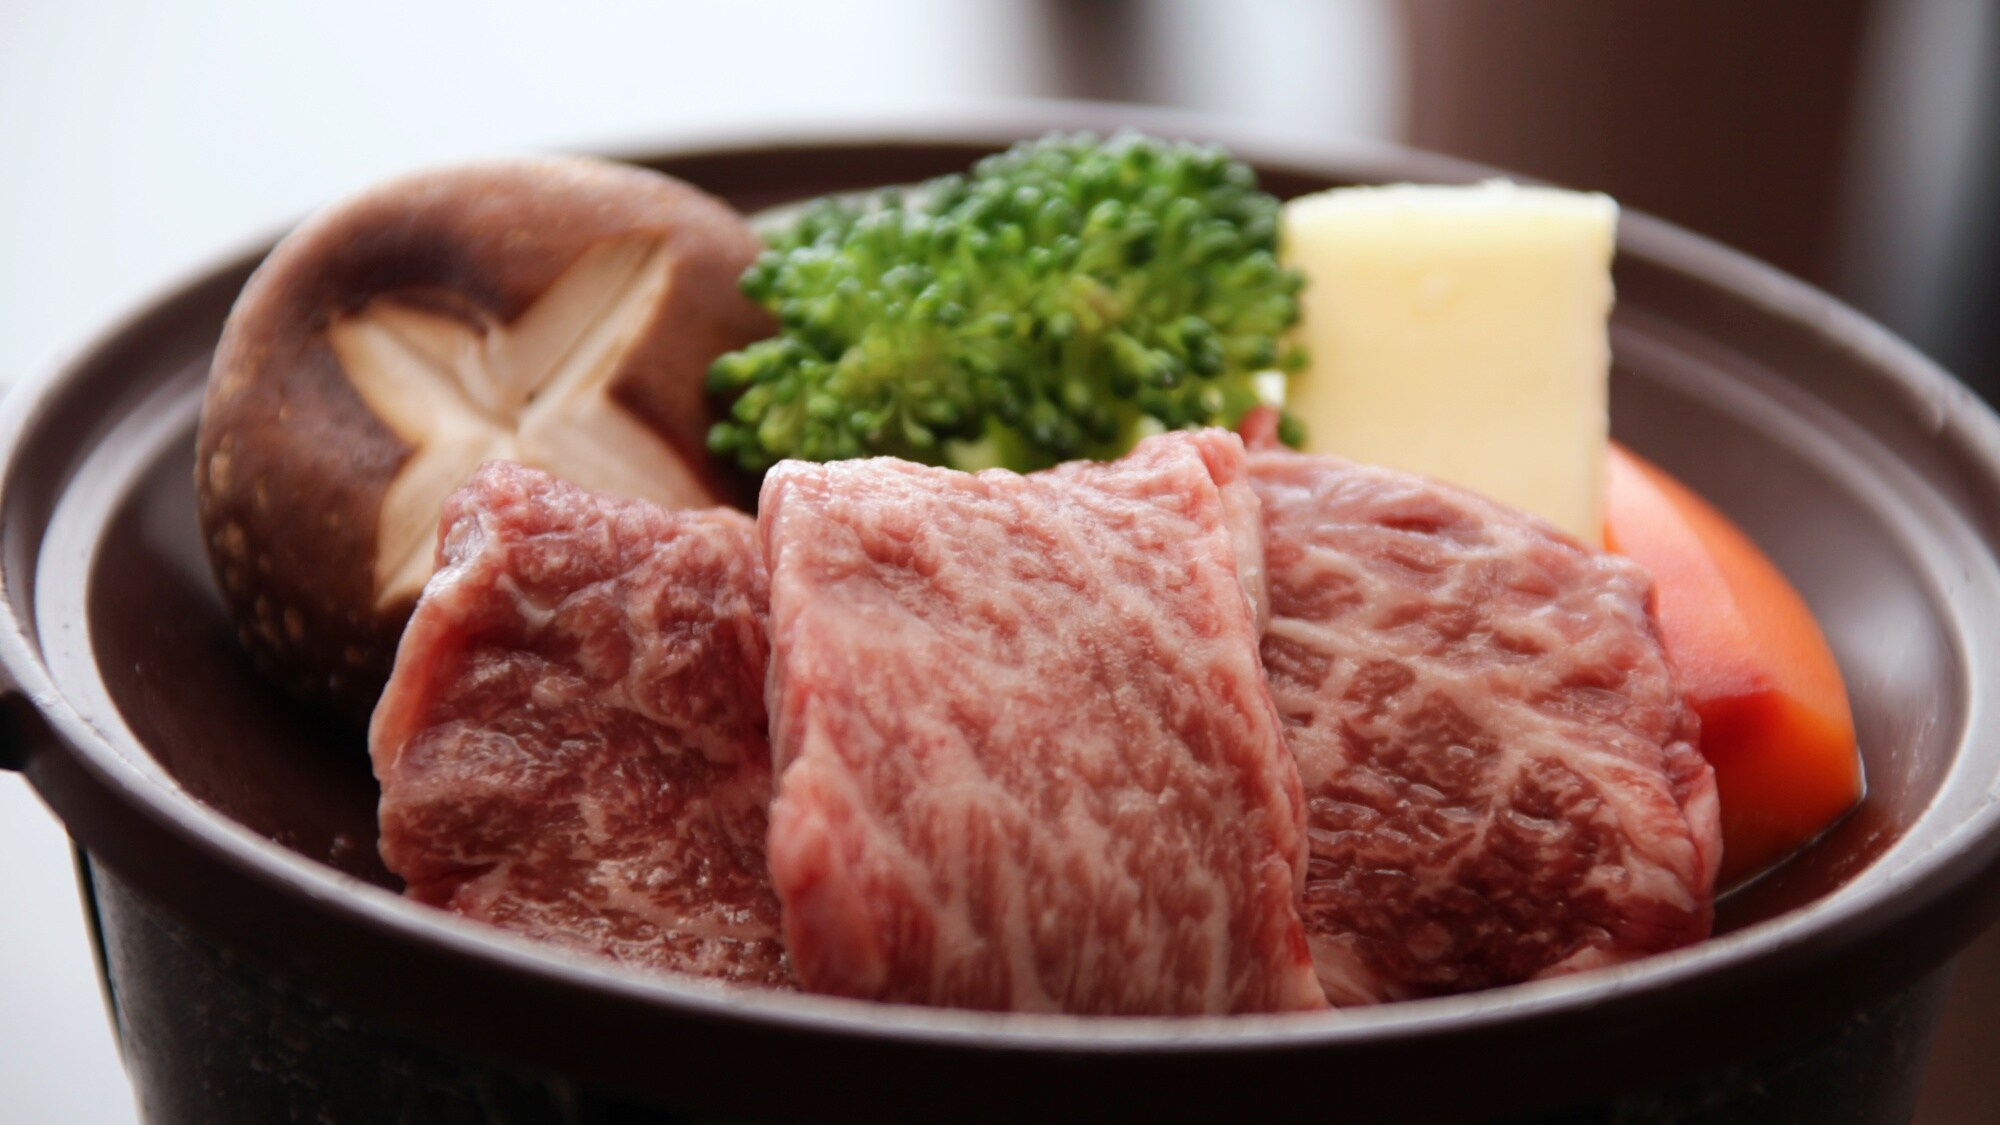 [Choice of grilled ceramic plate] Japanese beef from Niigata prefecture